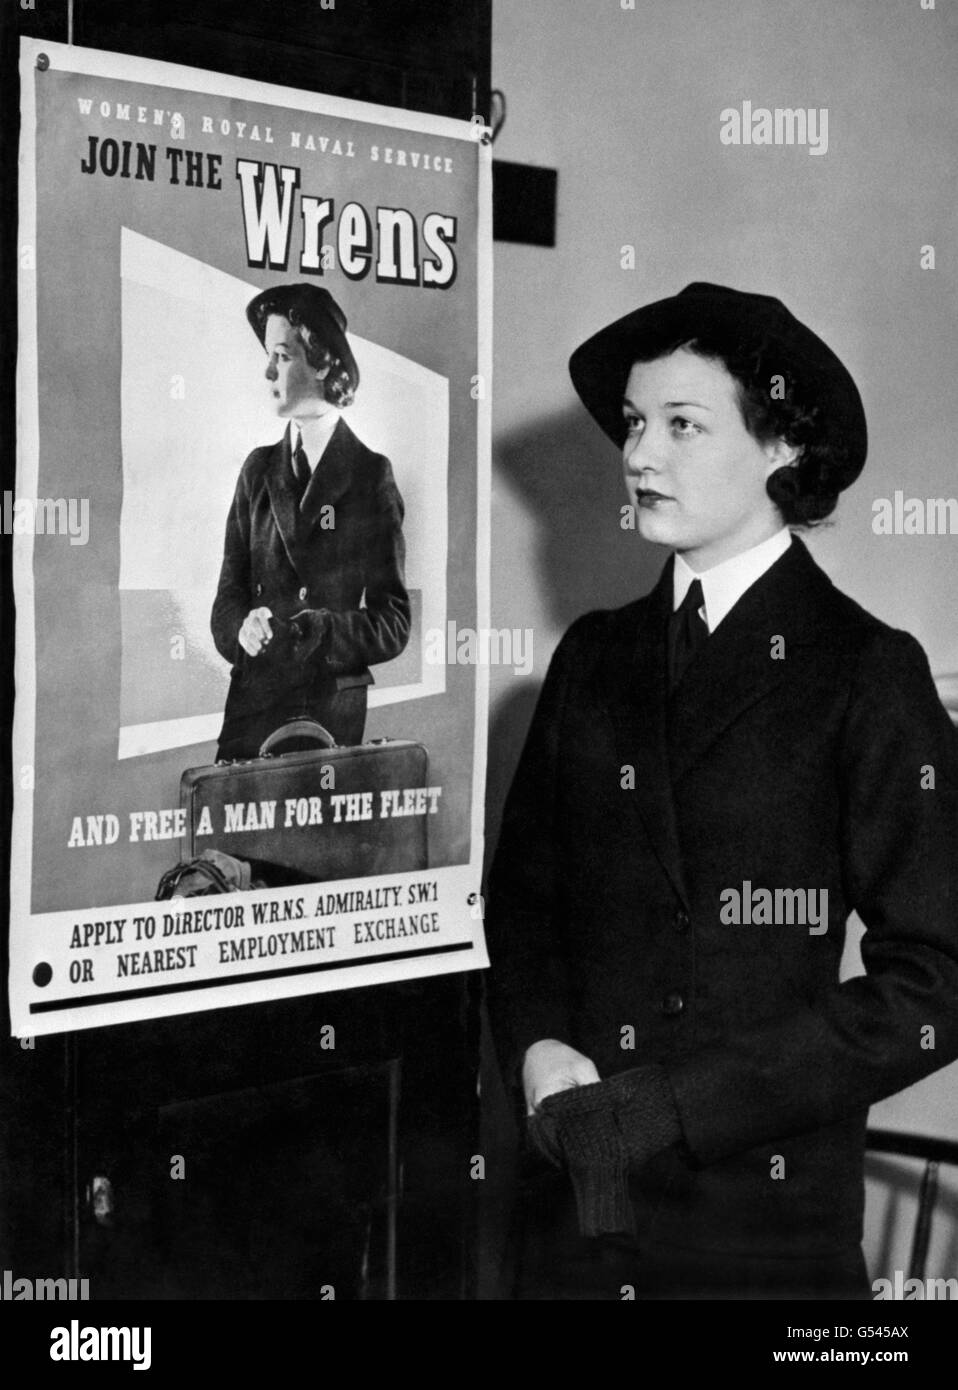 The actual Wren (a member of the Women's Royal Naval Service) who was chosen as a suitable model for this recruitment poster. Stock Photo